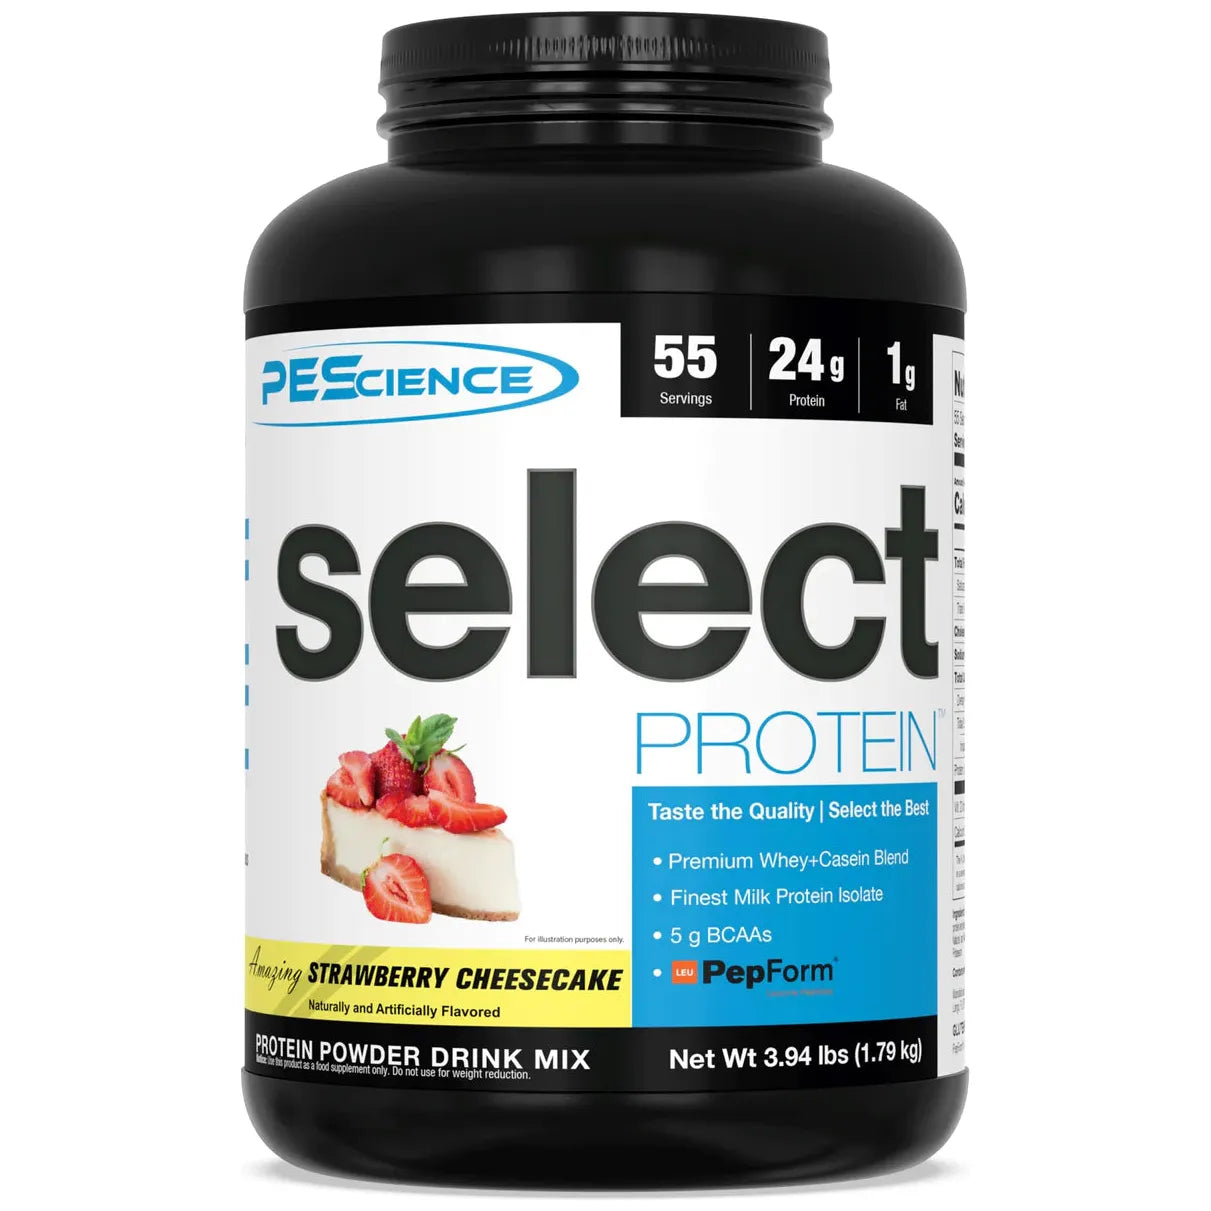 PEScience Select Protein (55 servings) Whey Protein Blend Strawberry Cheesecake PEScience